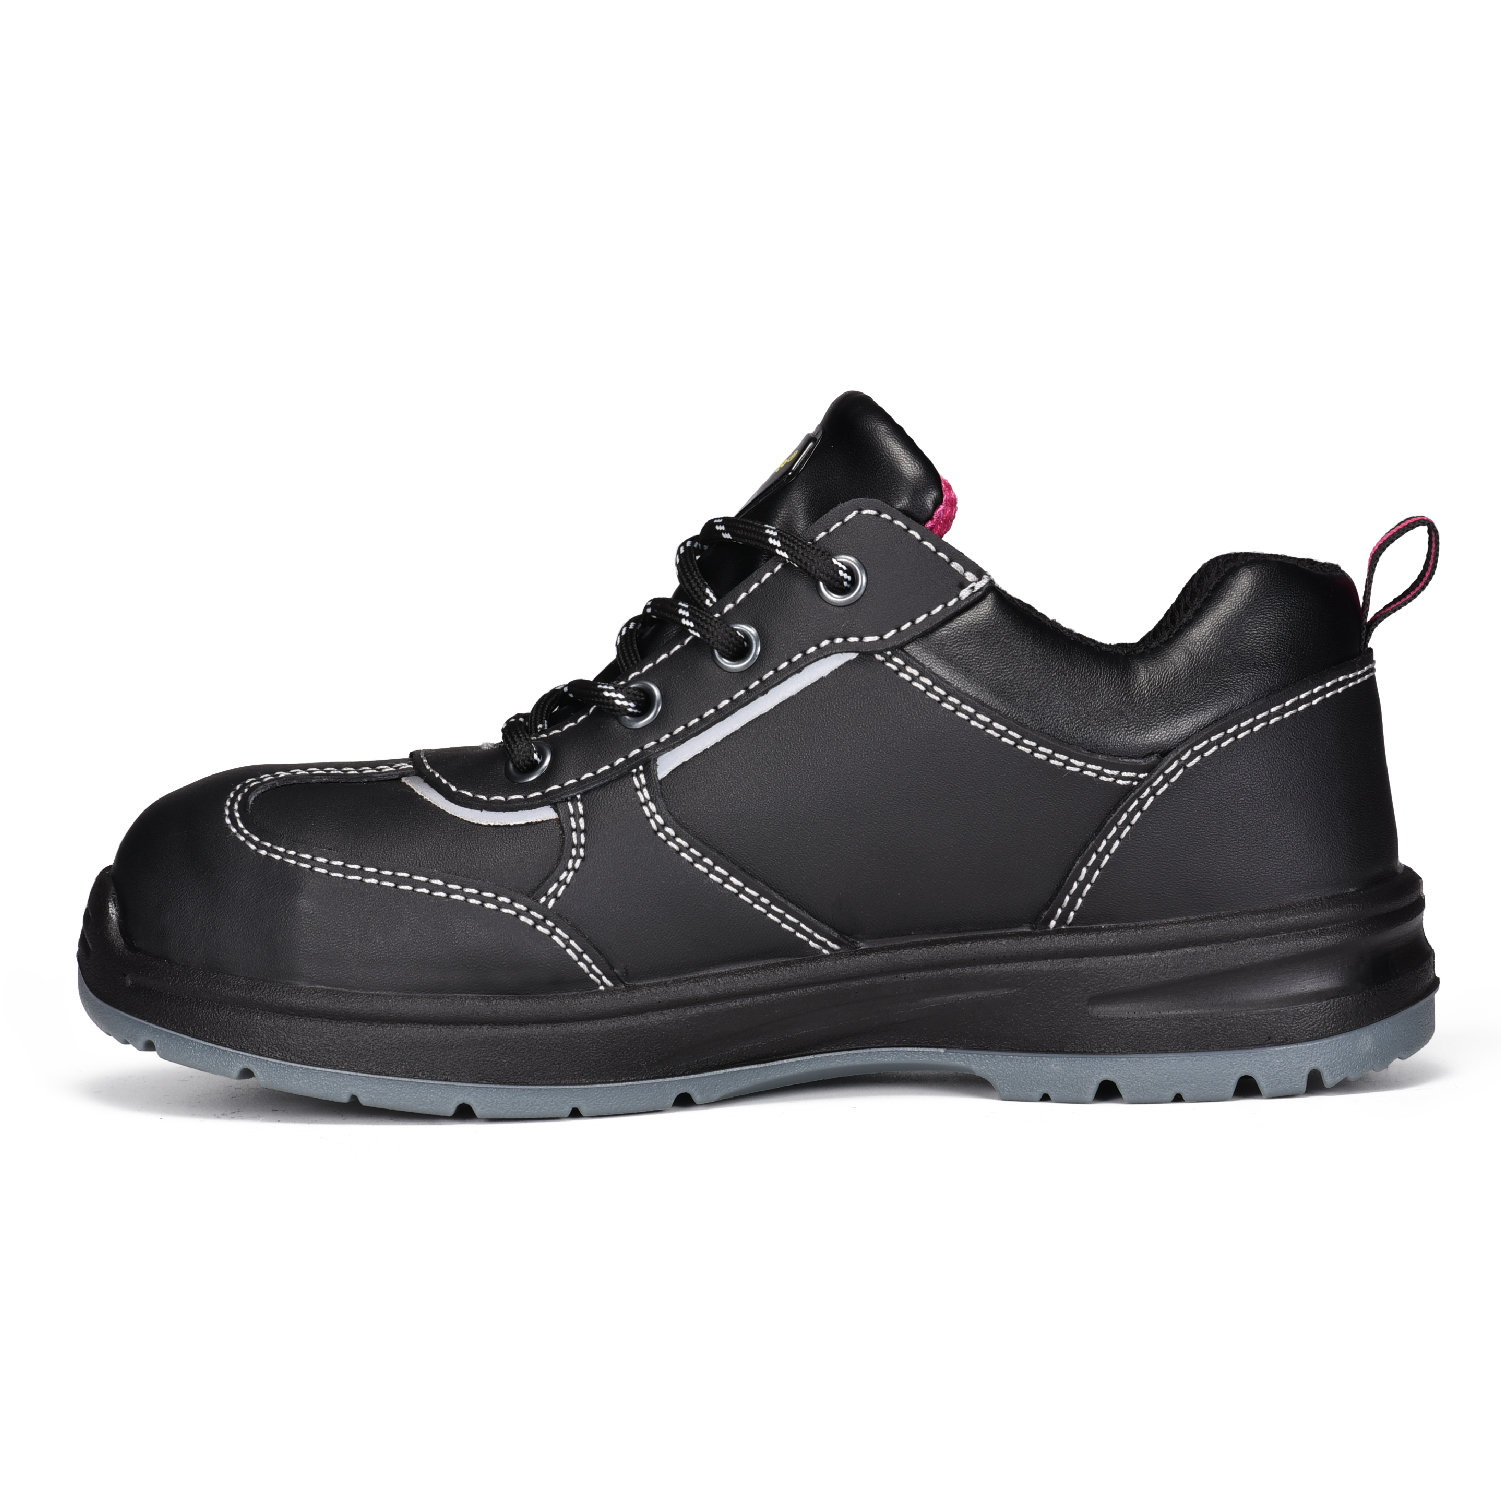 Black Cow Leather Womens Work Shoes with Safety Steel Toe L-7508 Smooth